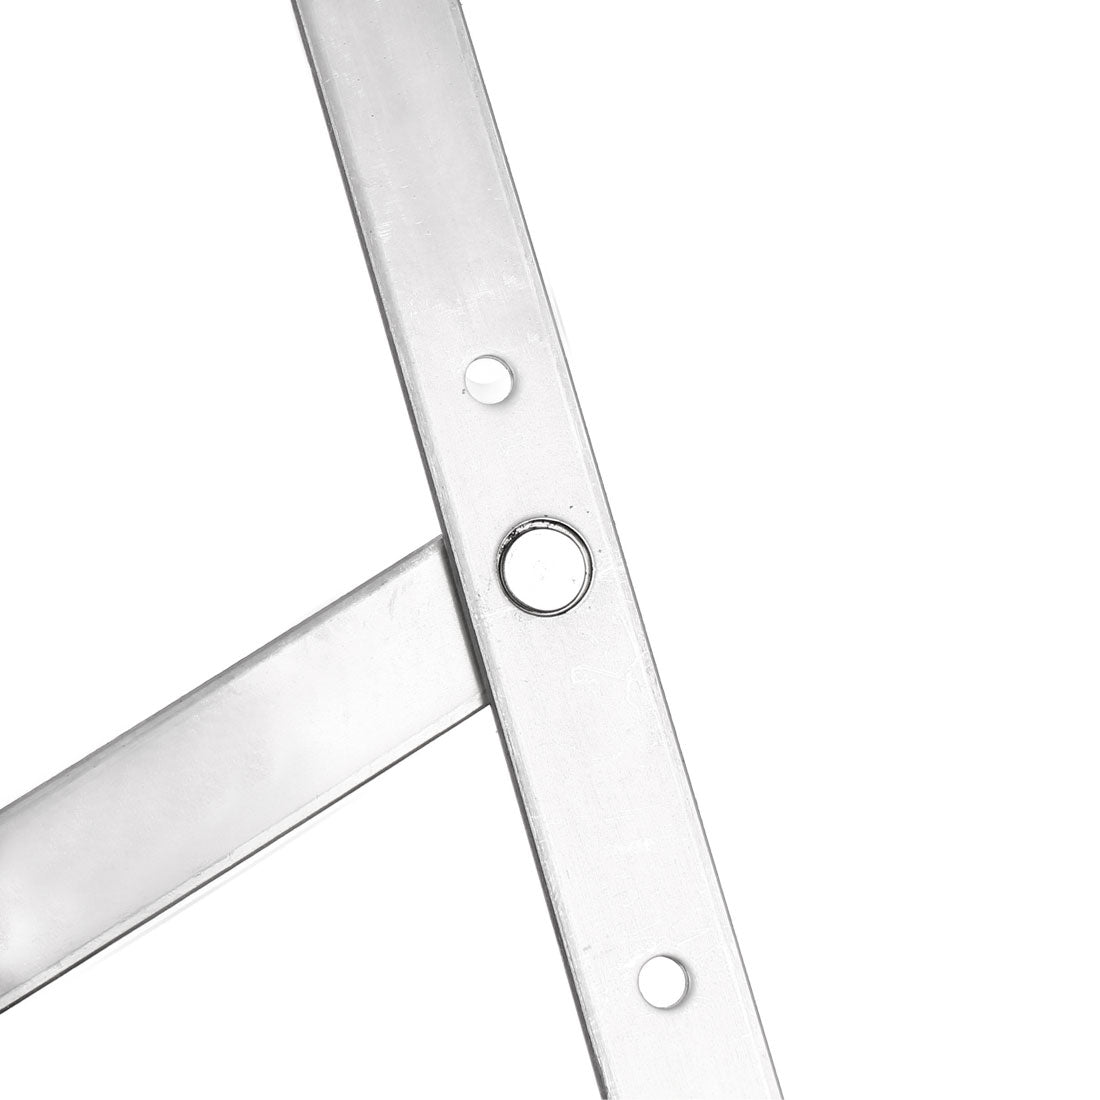 uxcell Uxcell 304 Stainless Steel 14-inch Casement Window Friction Hinge 4 Bar 2pcs